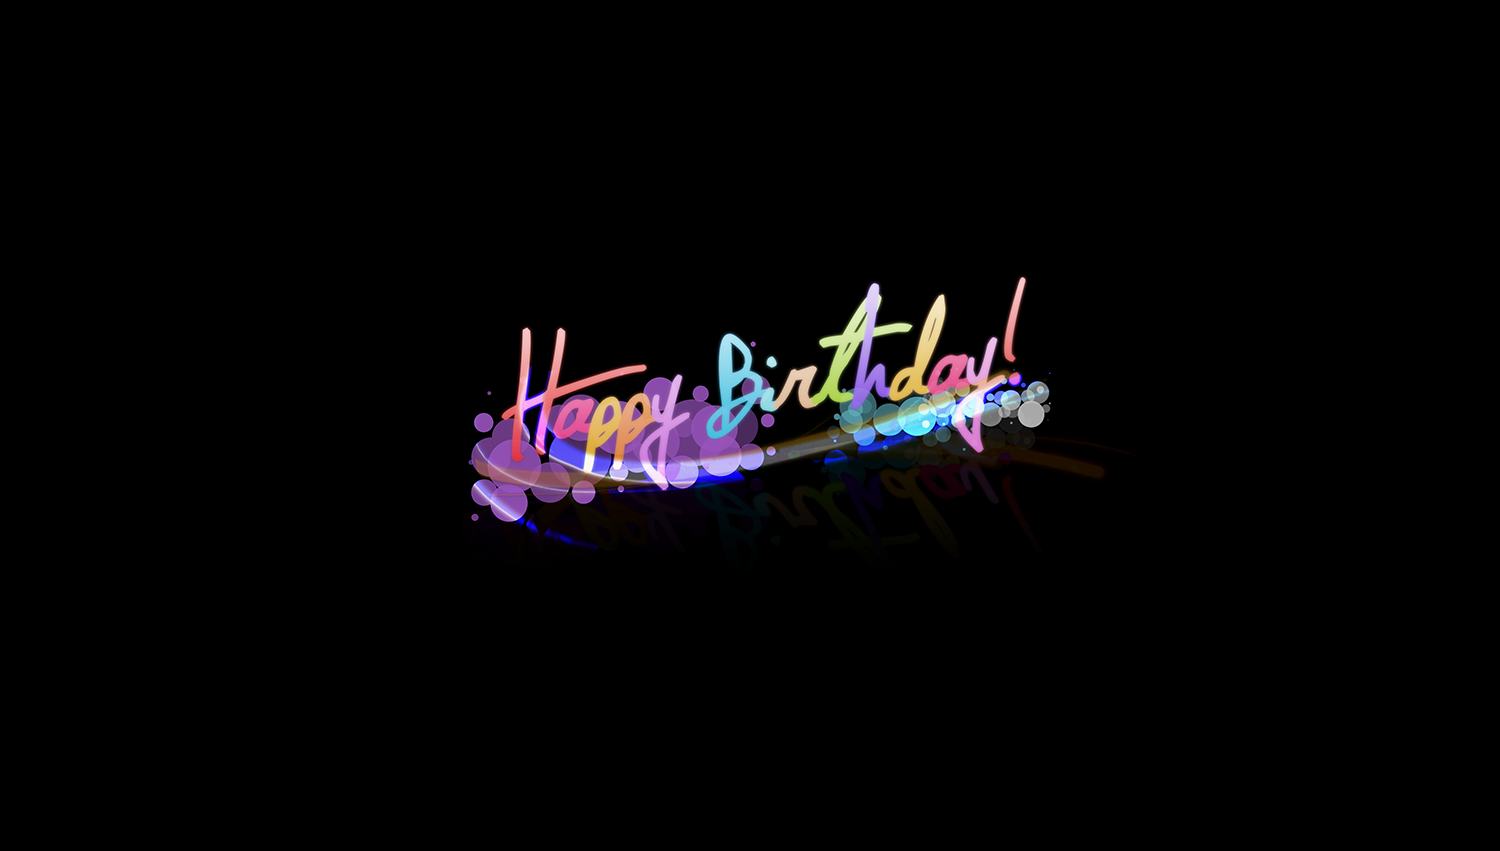 Special happy birthday cake wallpapers